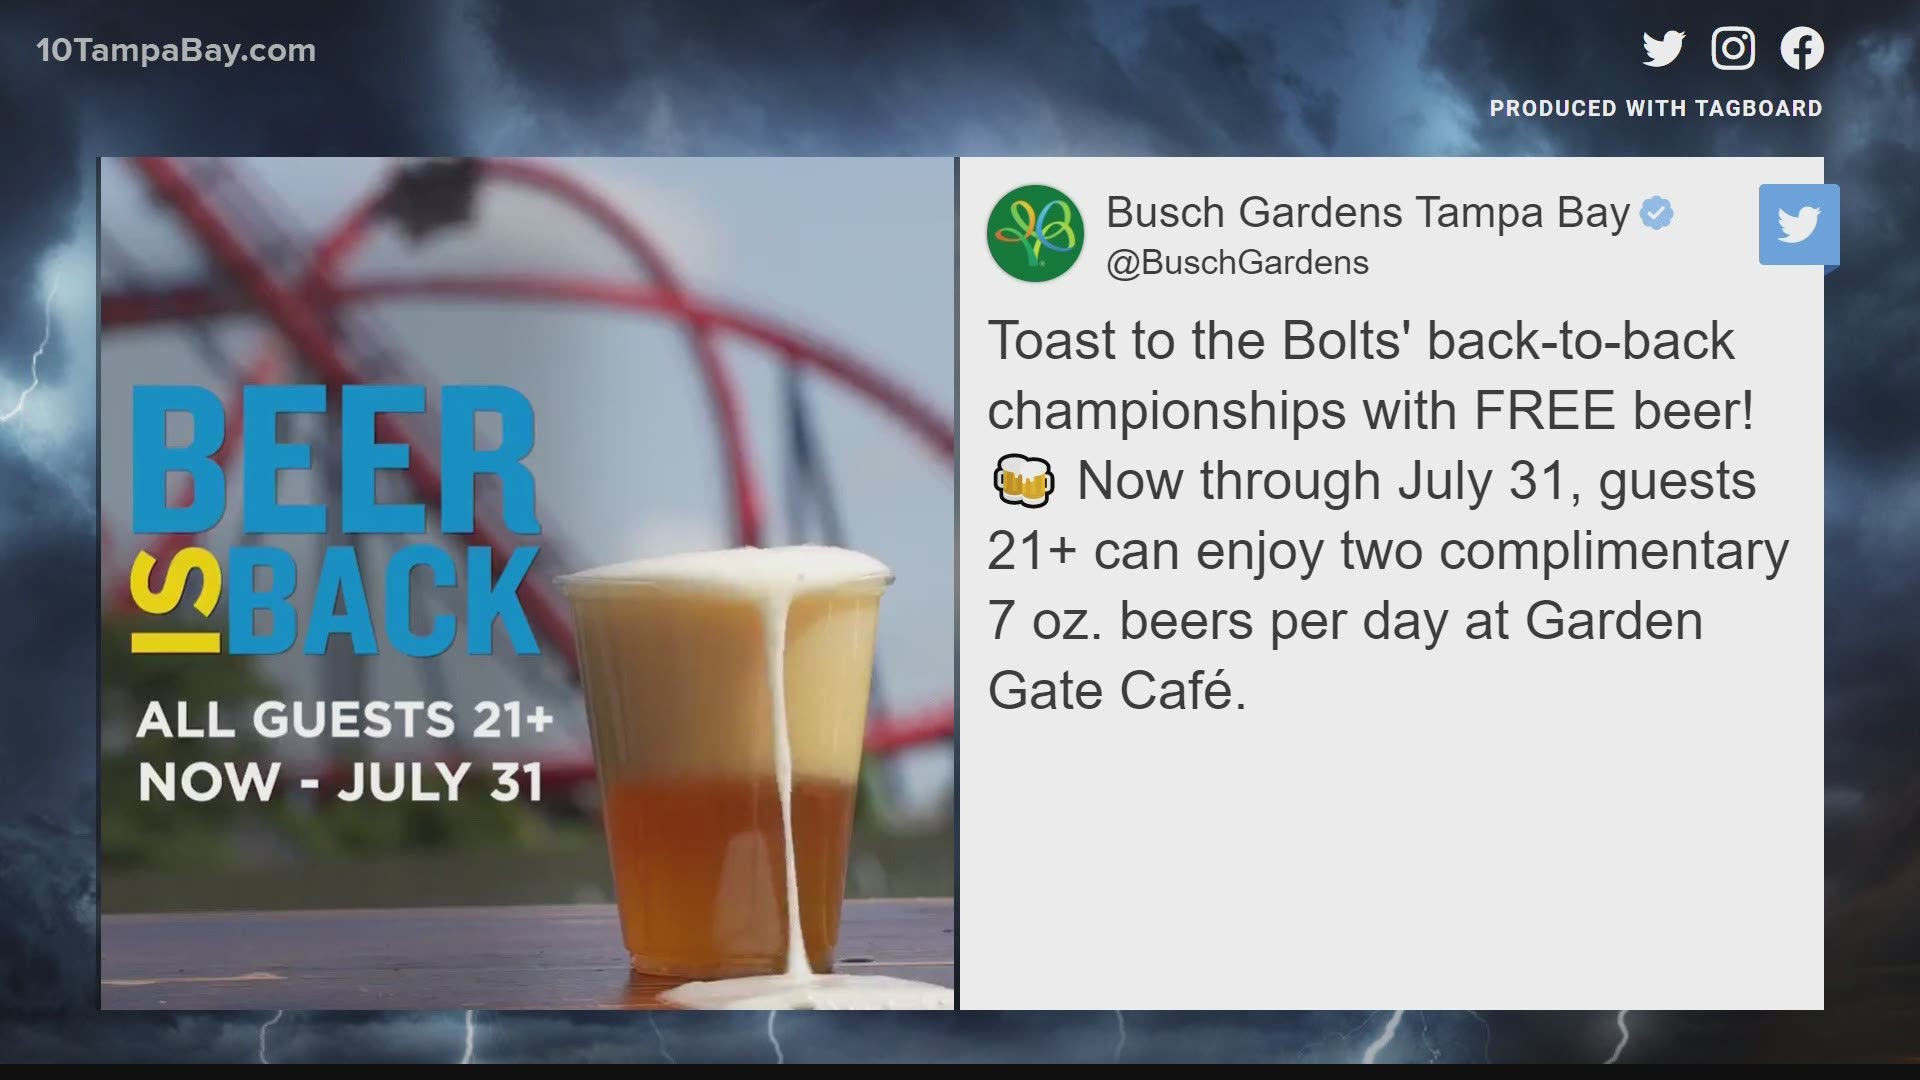 For the entire month of July, guests can visit the Garden Gate Café to receive two 7-ounce complimentary beers.